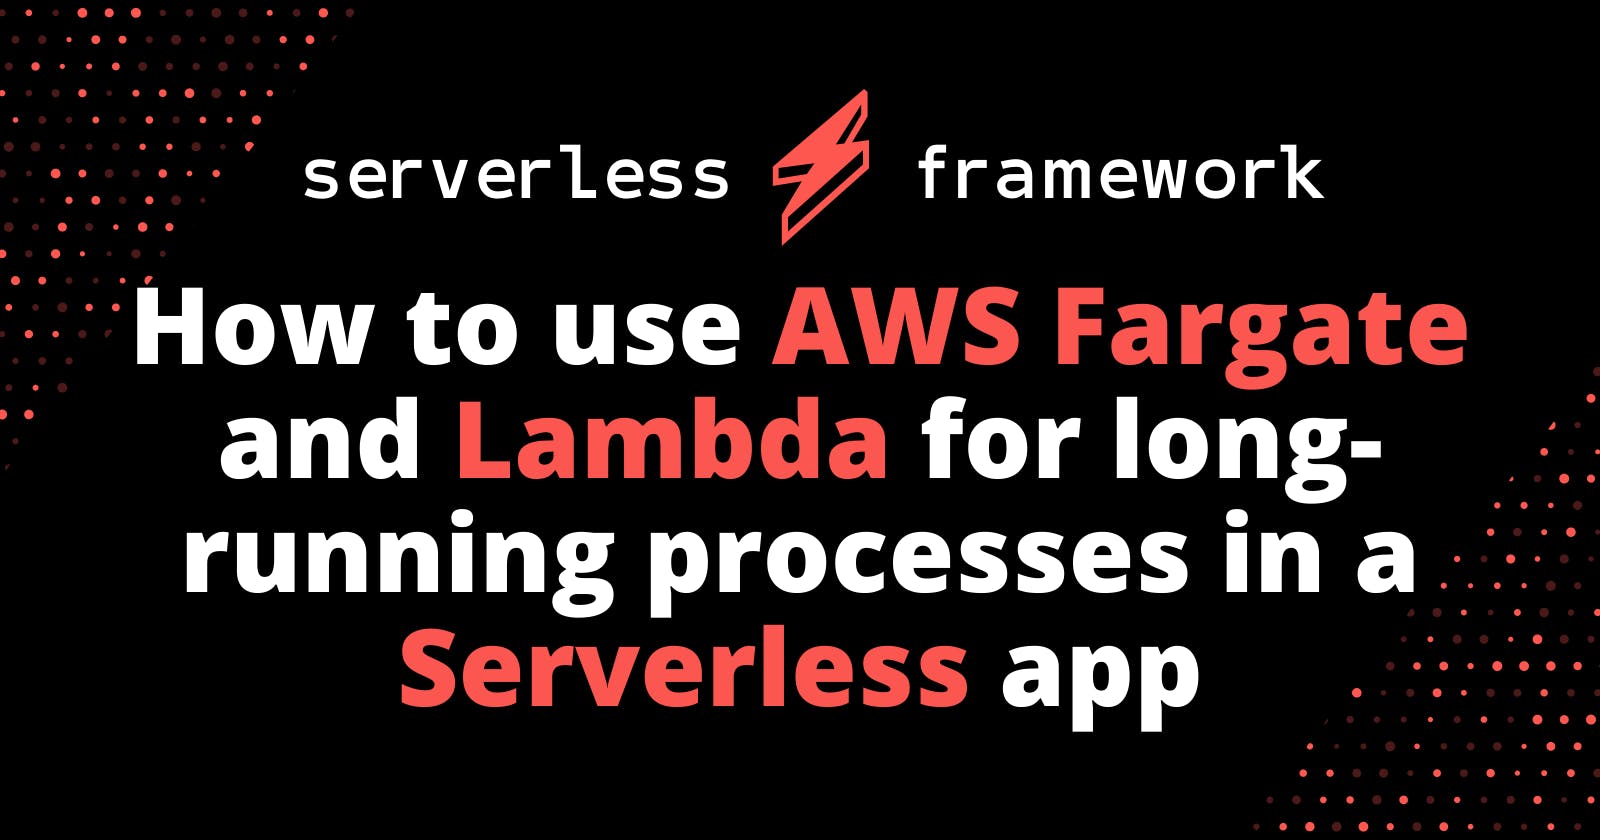 How to use AWS Fargate and Lambda for long-running processes in a Serverless app